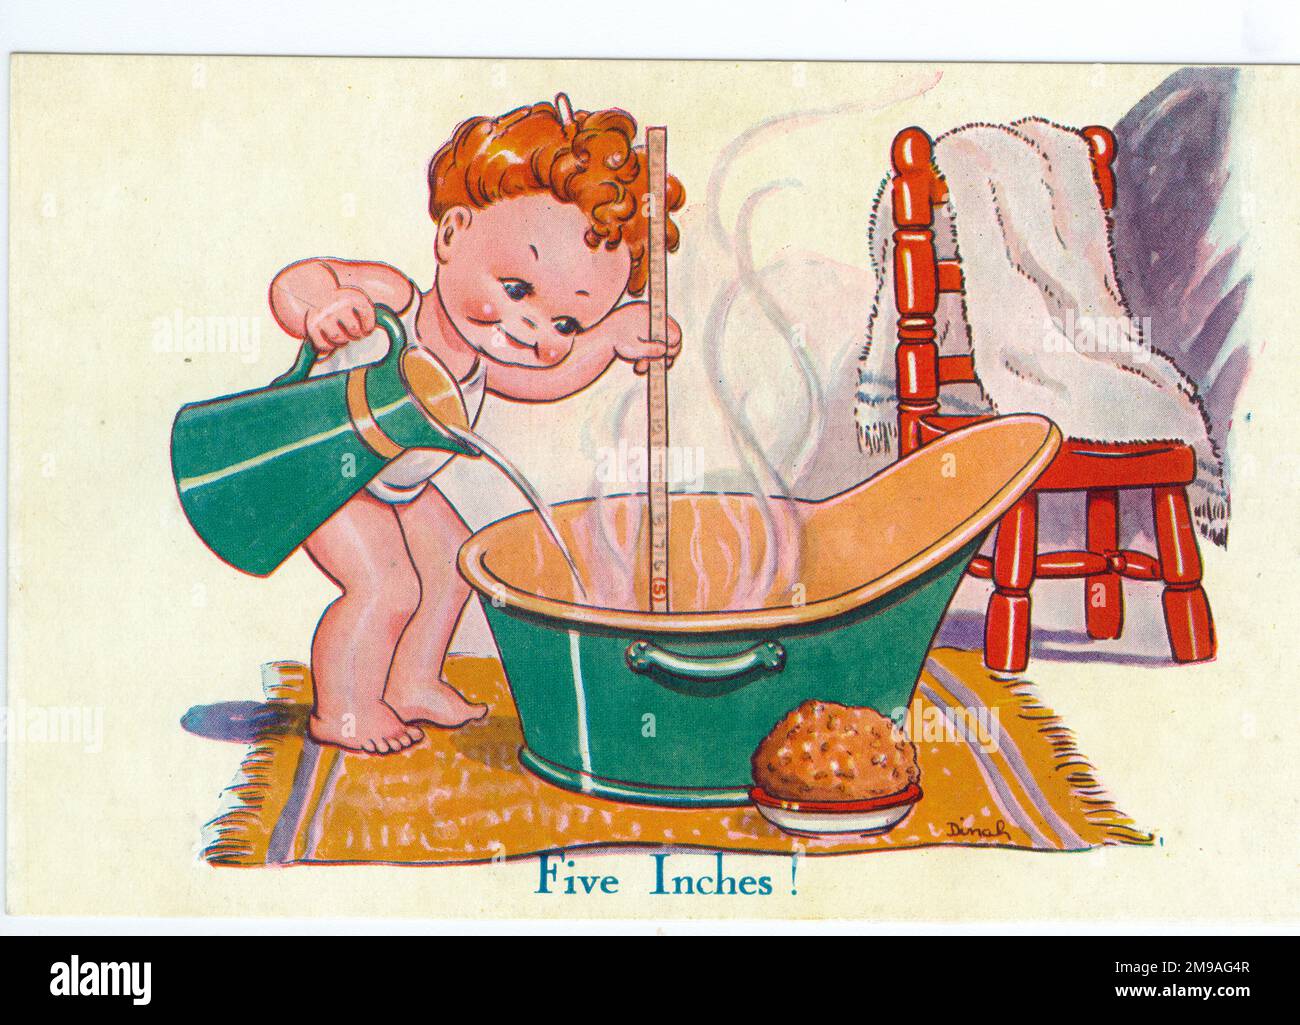 The public was asked to restrict the depth of water in their baths to 5 inches (13cm) in order to limit the use of power resources. The Caption here is 'Five Inches!' Note the sponge.The Prime Minister's words on the back are 'We shall continue steadfast in faith and duty until our task is done'. Cute Kids WW2 Wartime humour Stock Photo